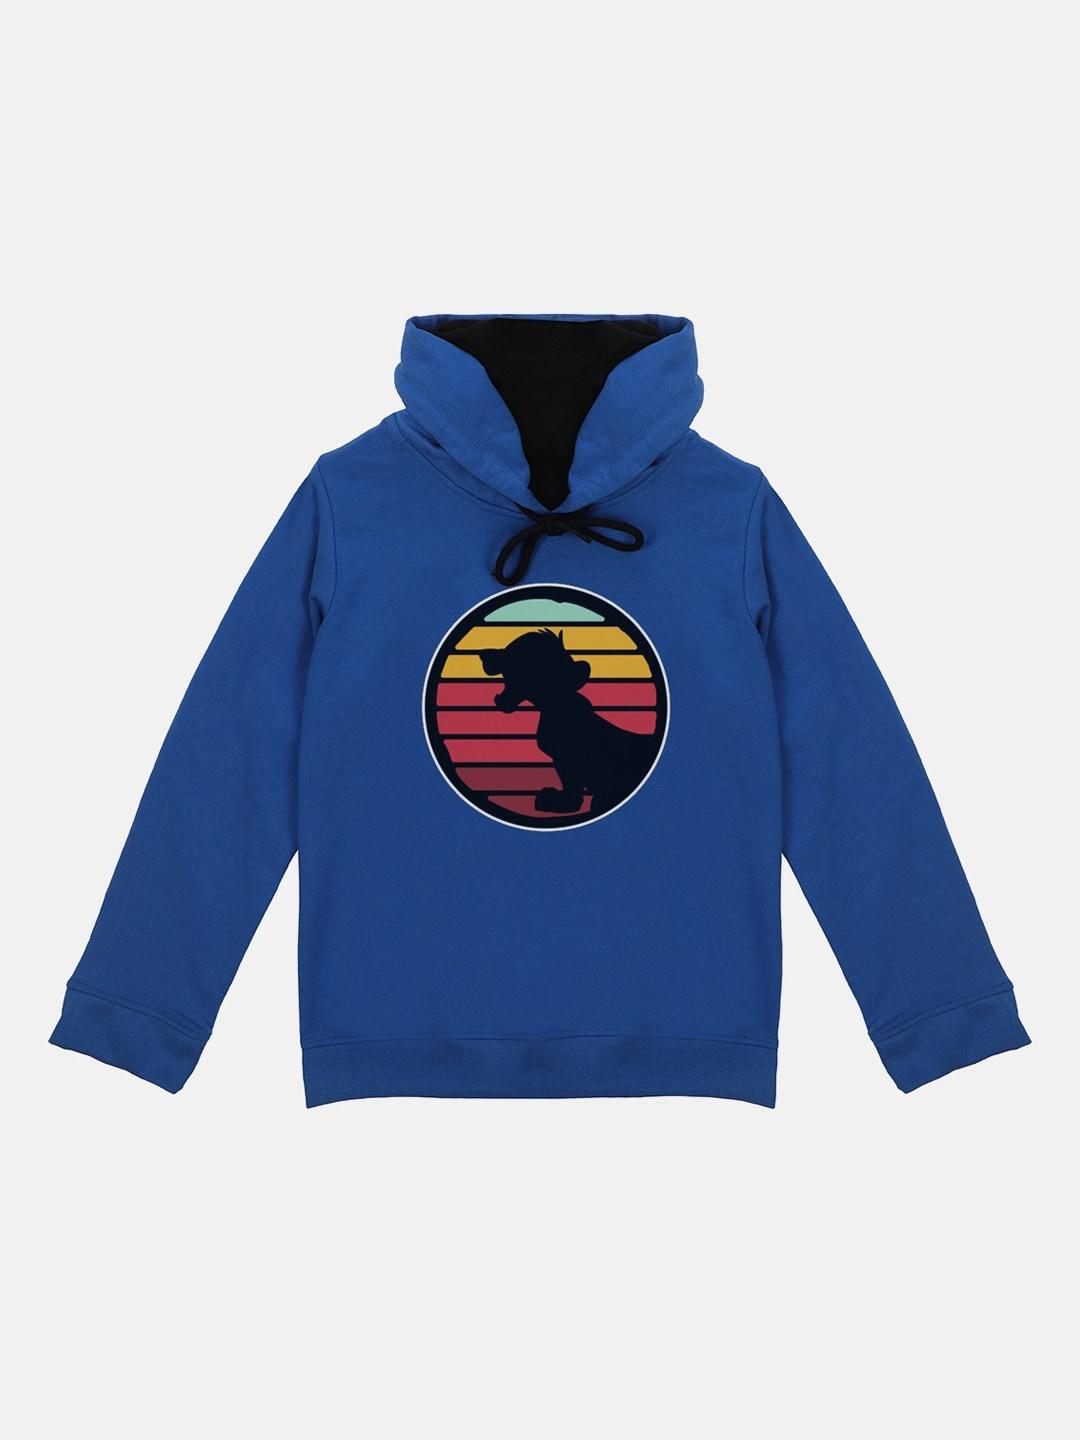 Disney by Wear Your Mind Boys Blue Printed Hooded Sweatshirt With Attached Face Covering